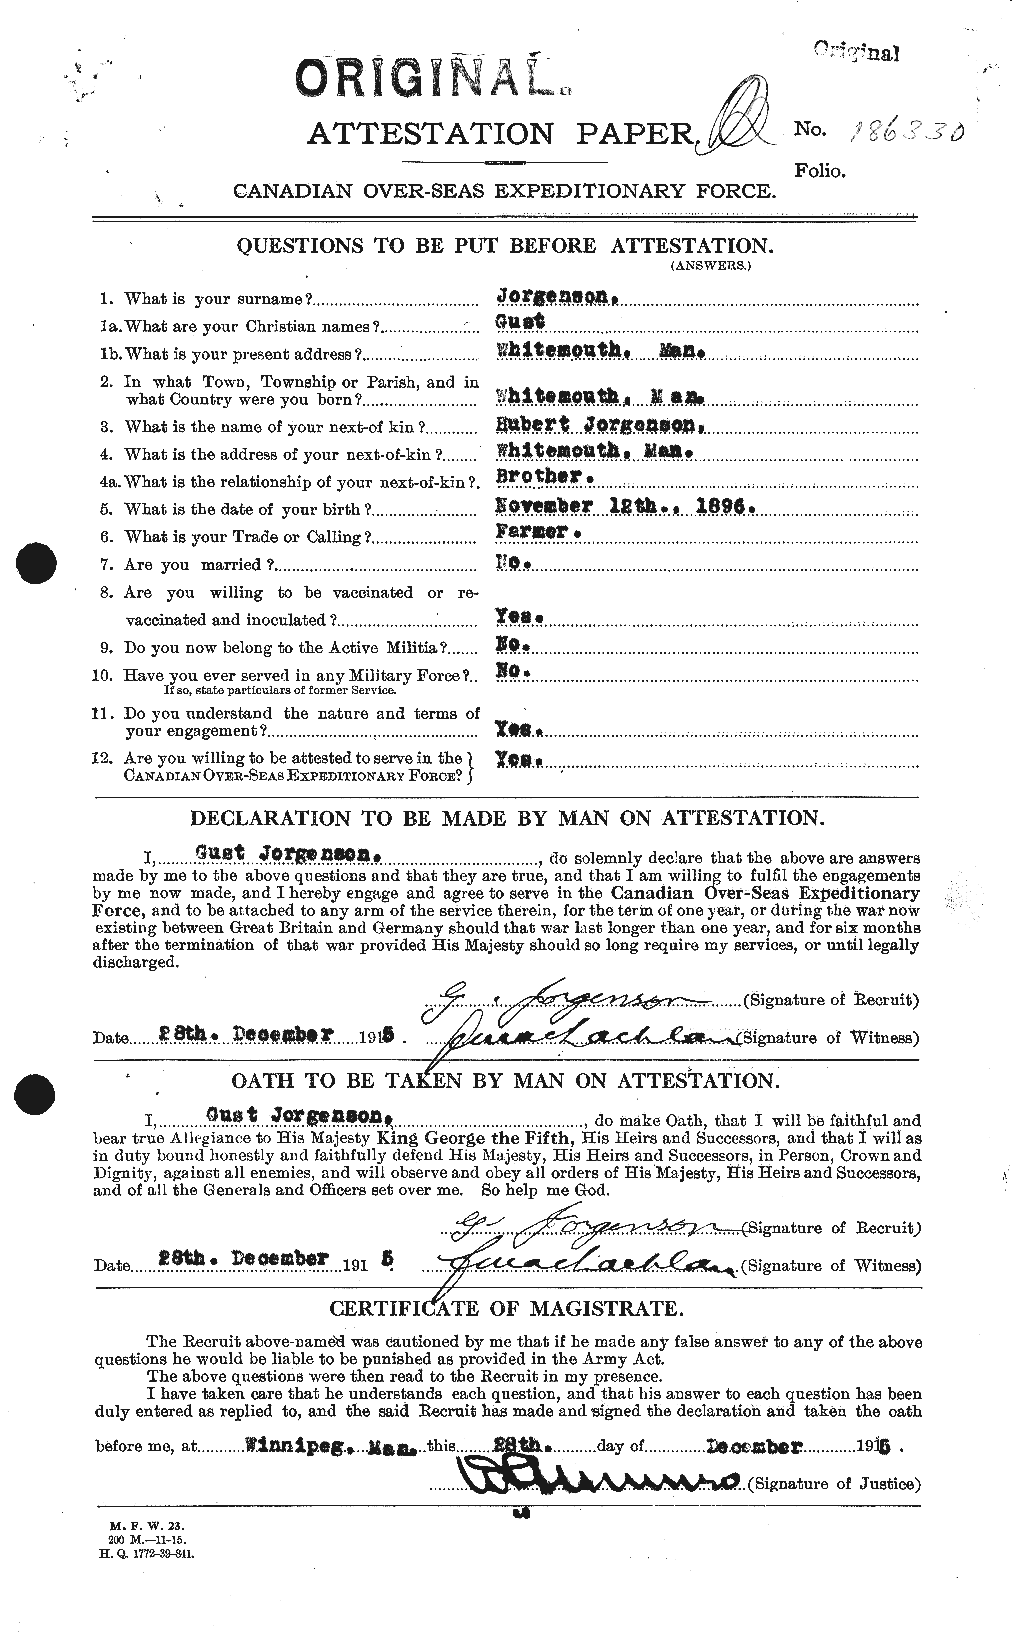 Personnel Records of the First World War - CEF 424561a